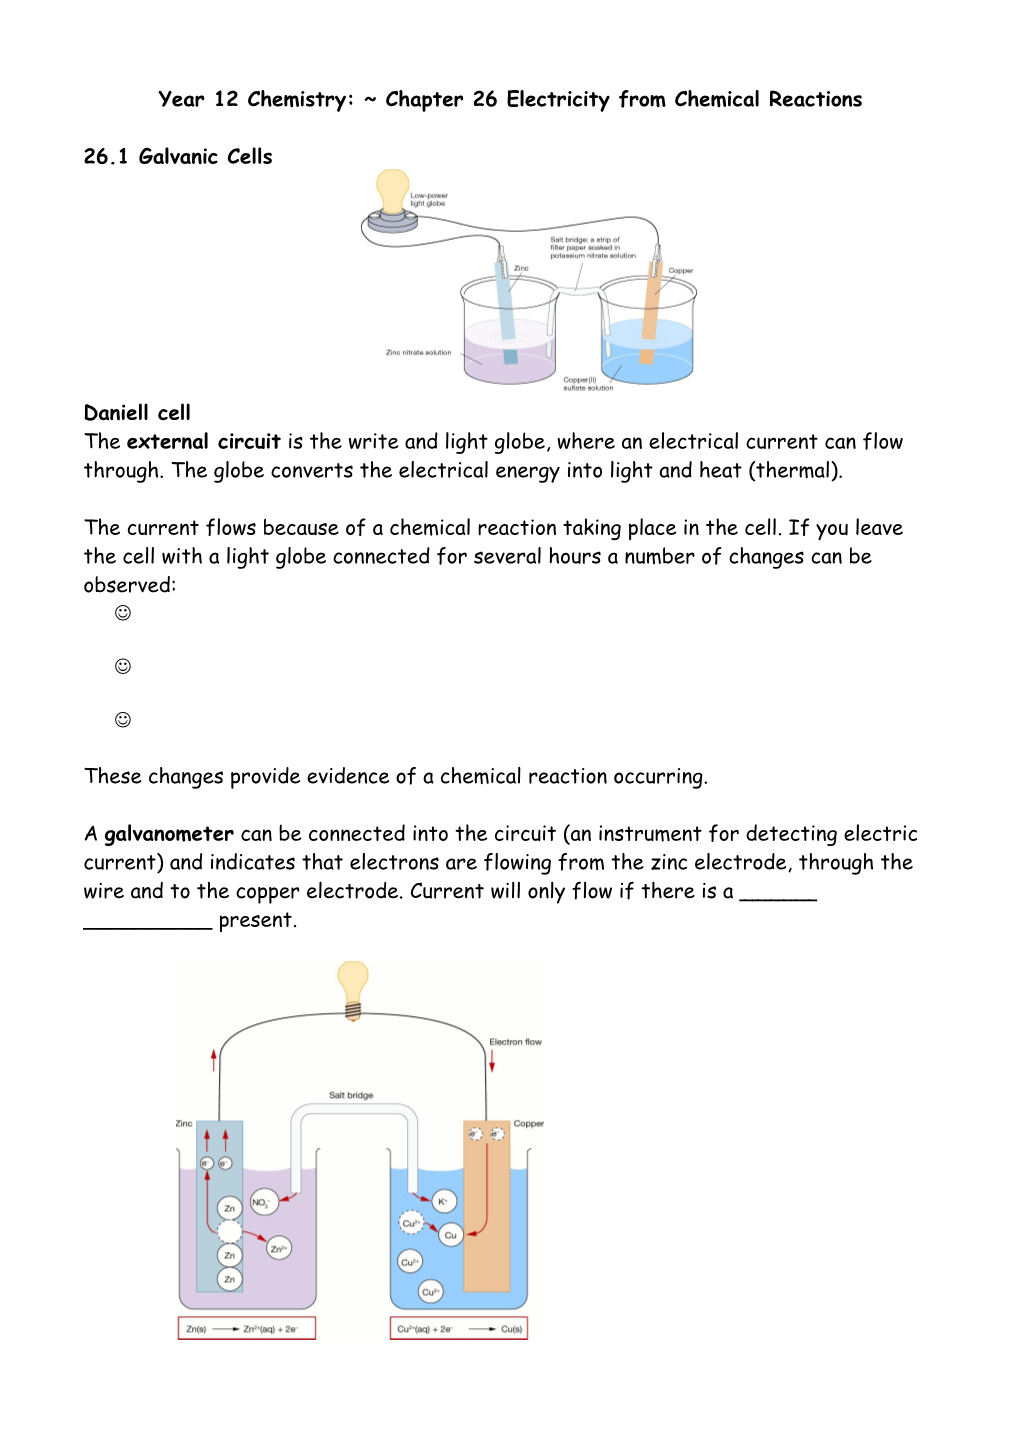 Year 12 Chemistry: Chapter 26 Electricity from Chemical Reactions